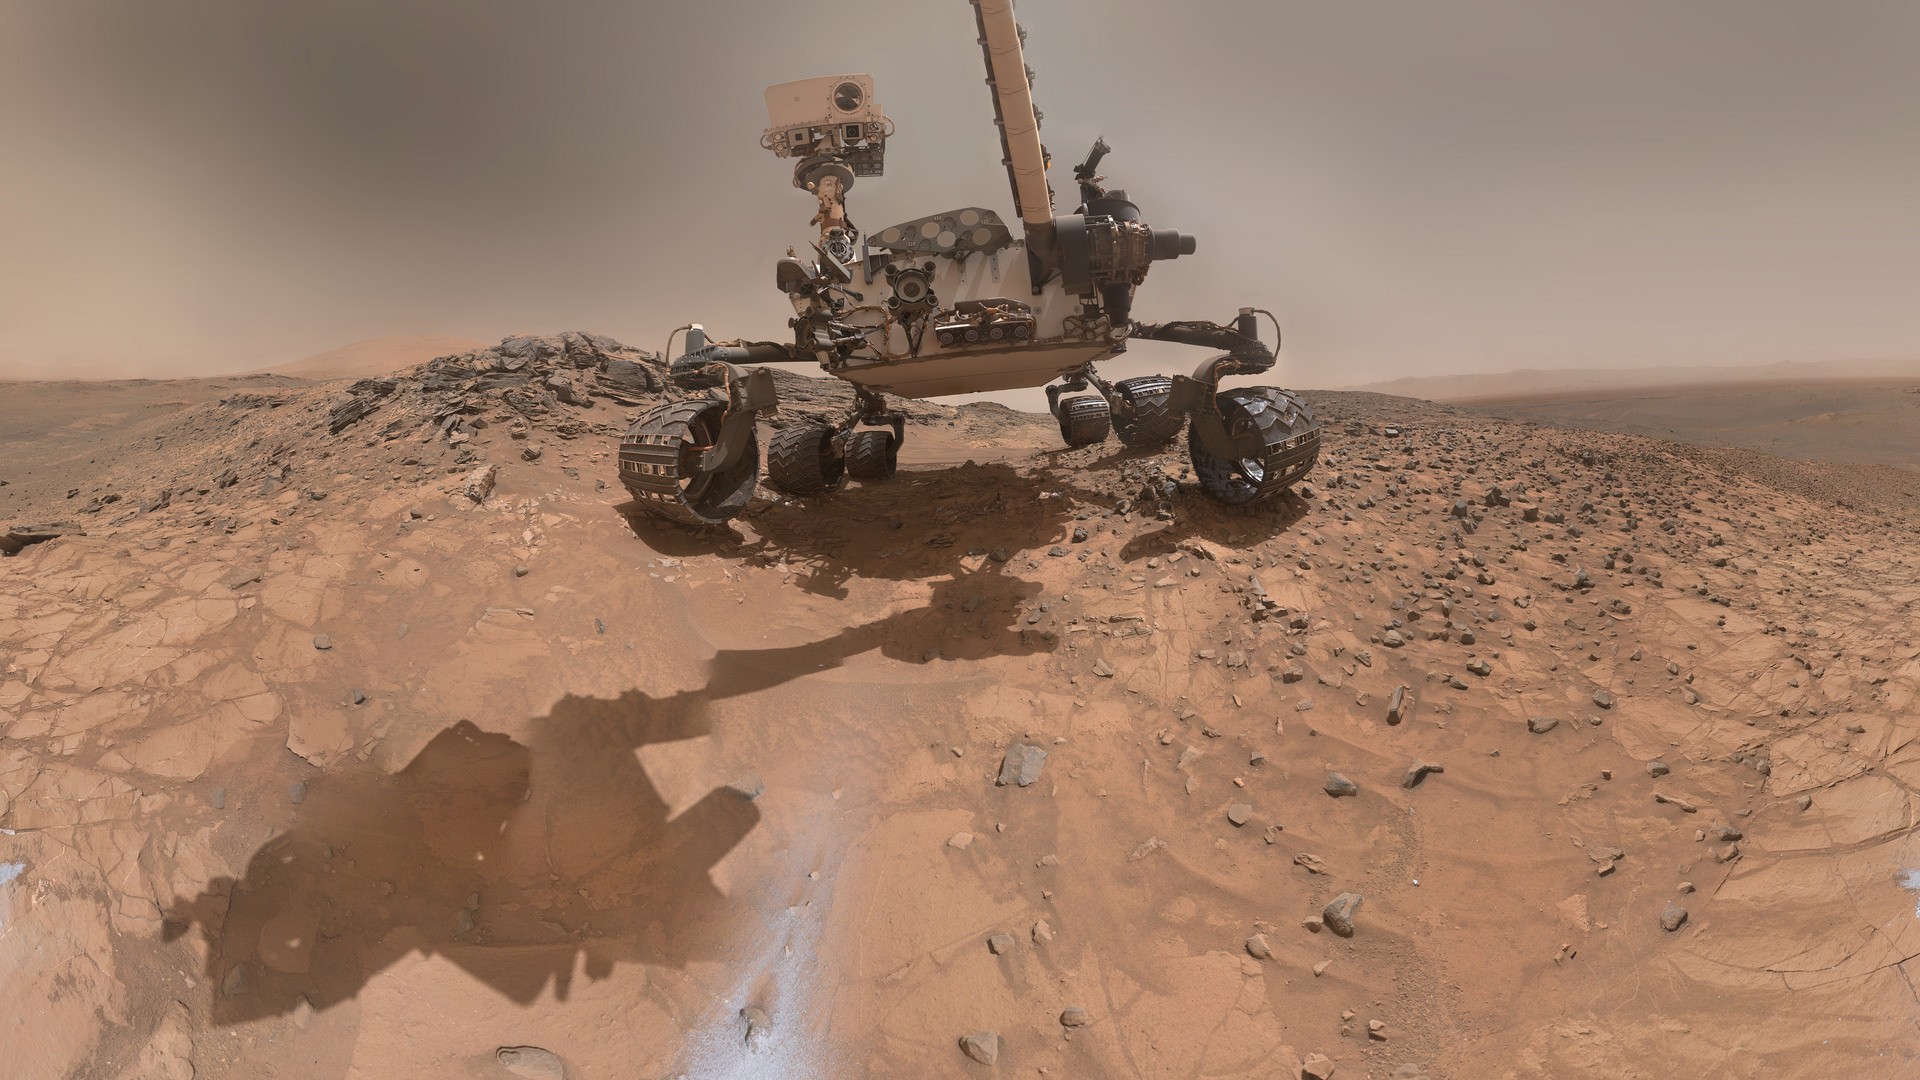 General 1920x1080 Curiosity Mars selfies space vehicle marsscape planet mars rover